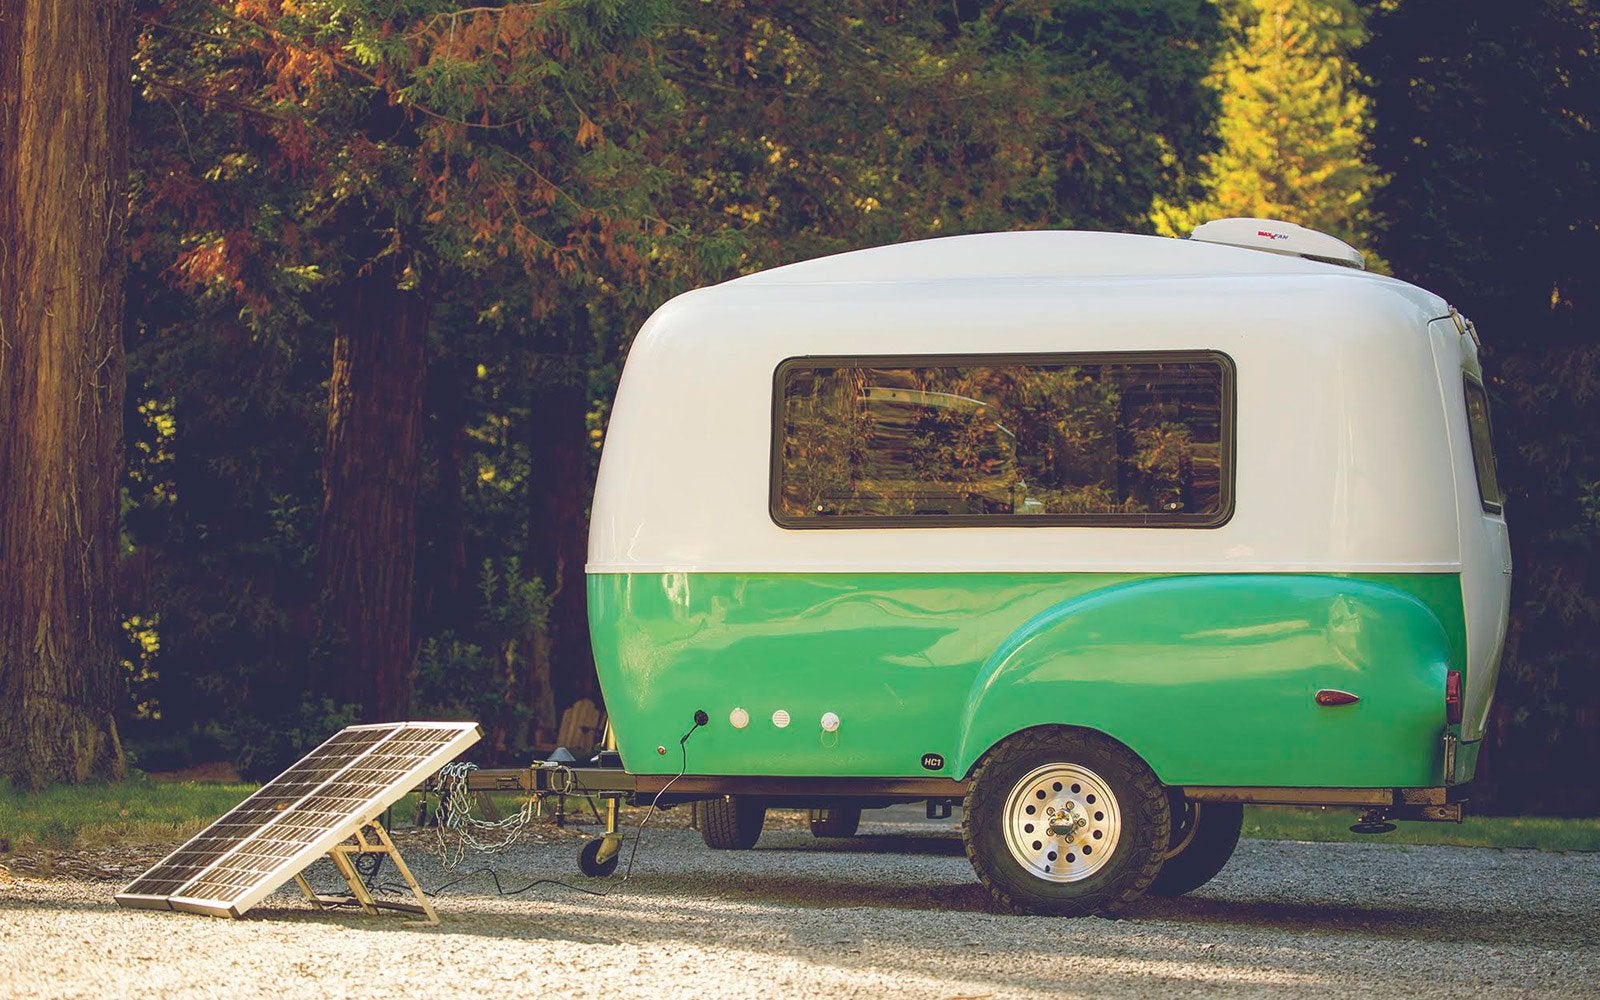 This Retro Camper Is One Of The Most Versatile RVs You’ll Ever Find